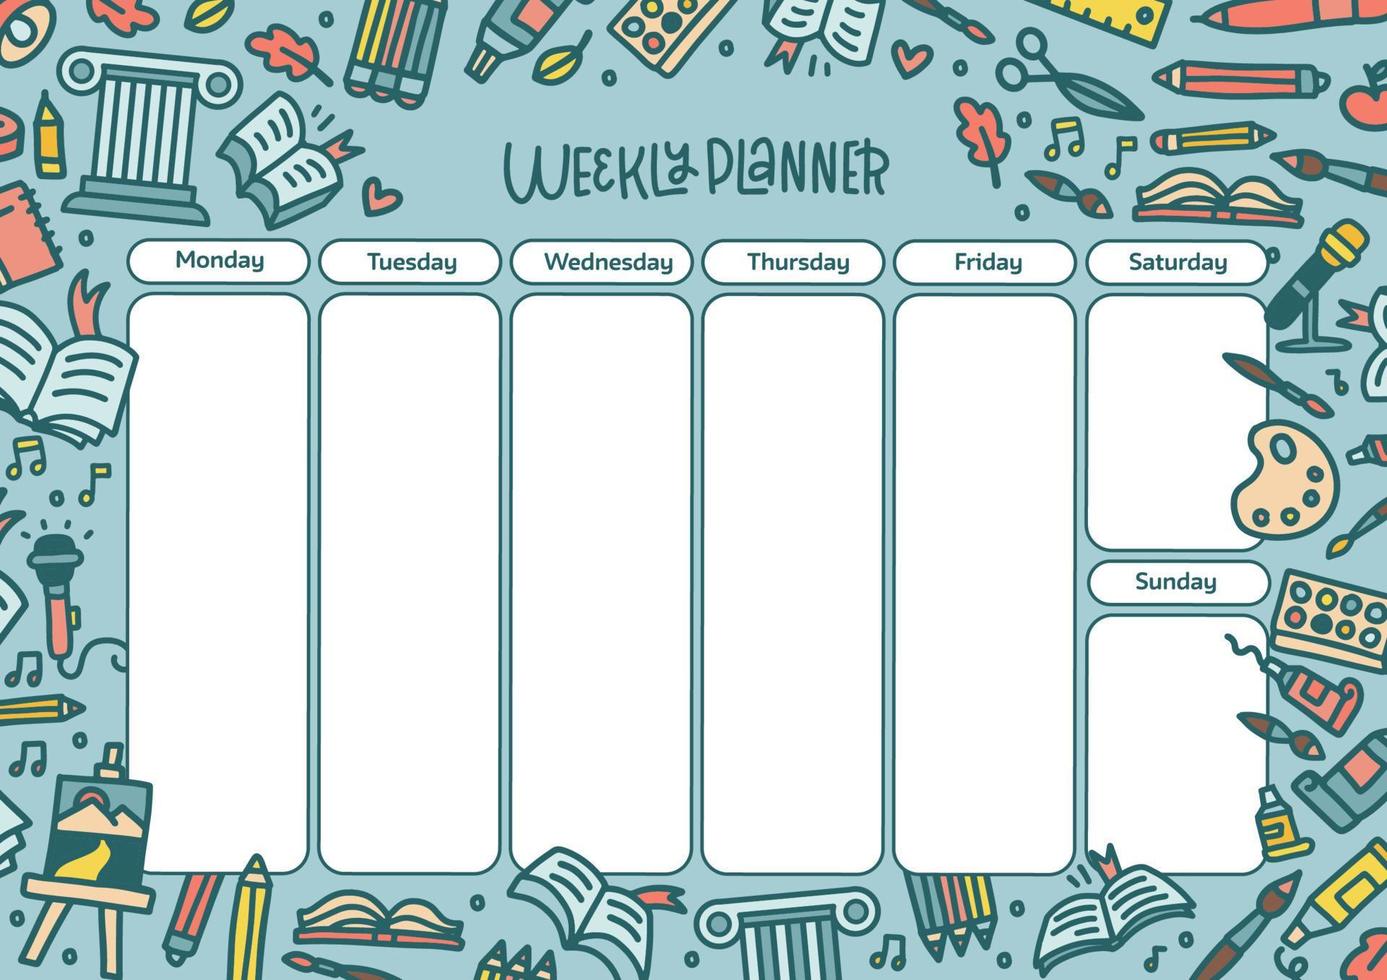 School weekly planner templat. Background with books, pens, pencils, and art supplies. A4 size template with doodle school objects and symbols. Hand Drawn color Vector illustration